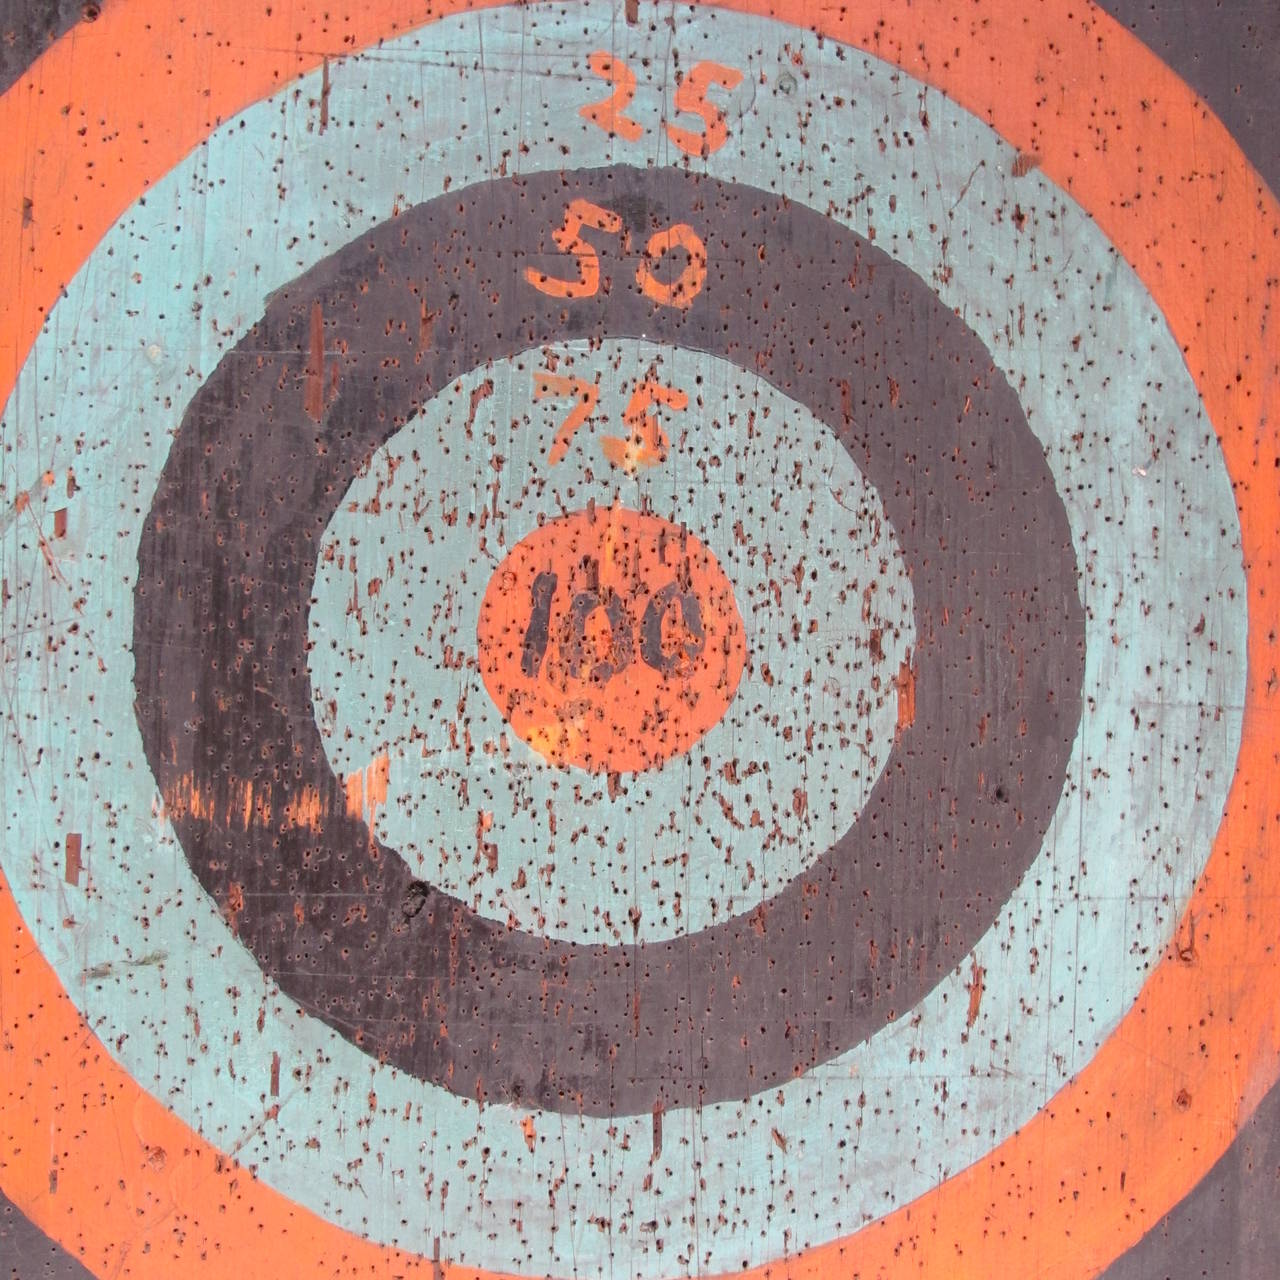 Graphic dartboard with well painted target. It shows a history of use yet it is a survivor. The wood may have had an earlier life as an old school writing board.